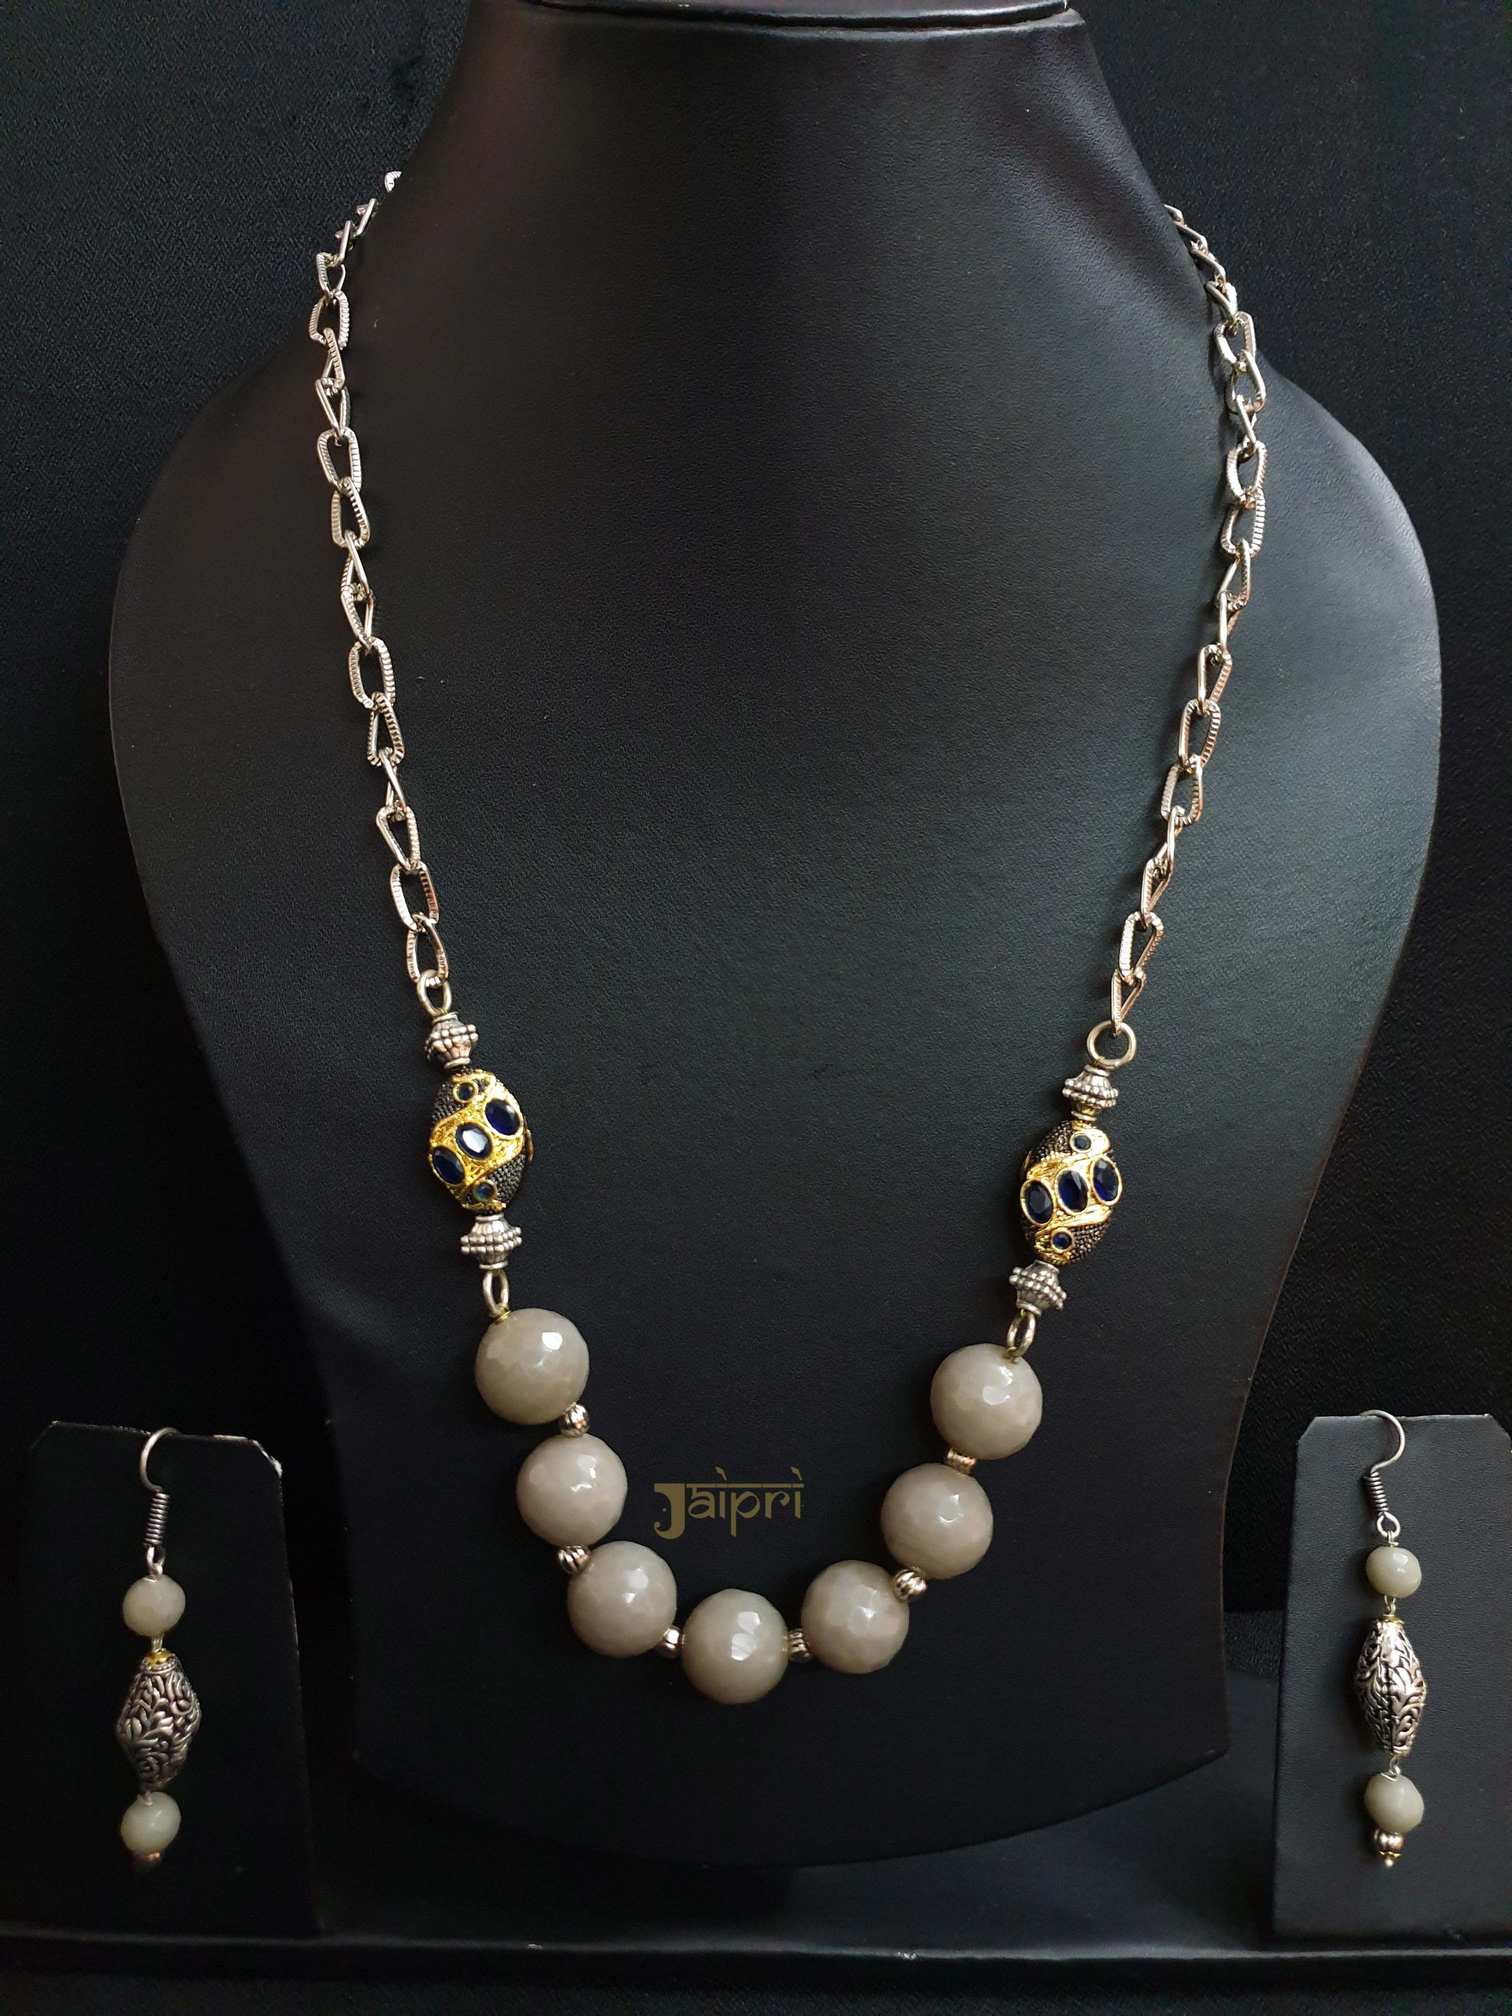 Oxidized Grey Stone, Necklace With Earrings